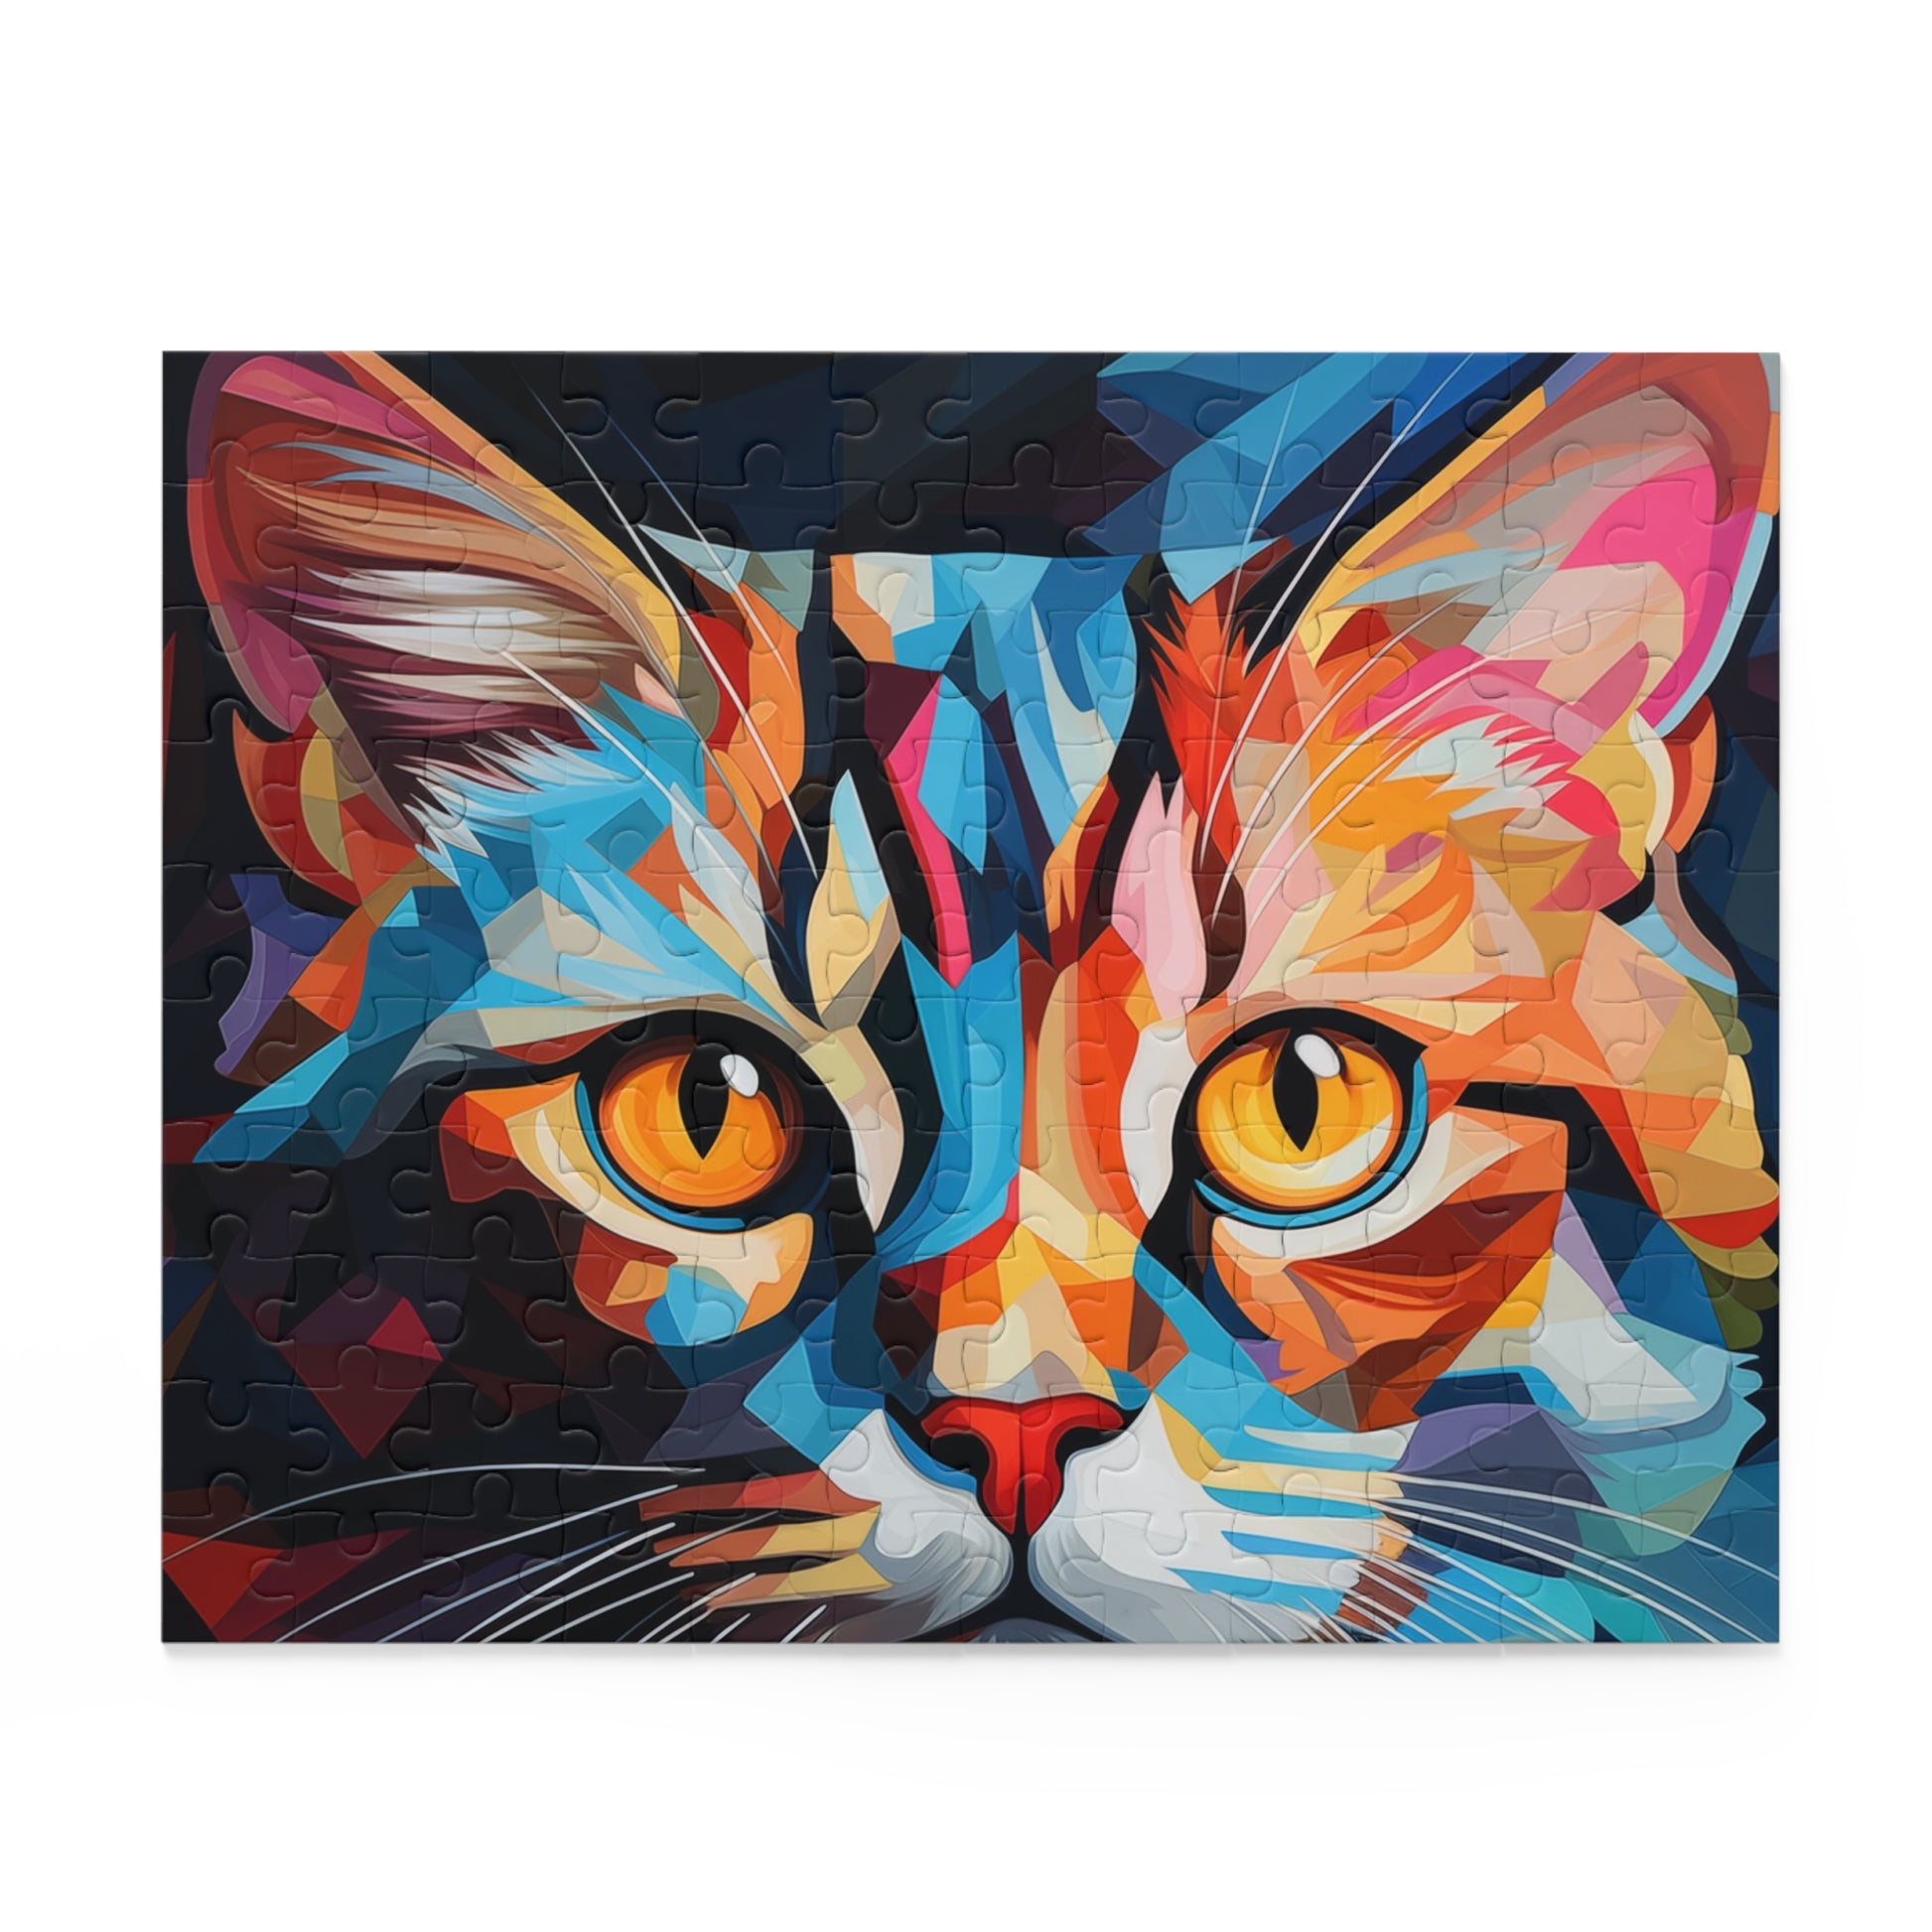 Abstract Oil Paint Colorful Cat Jigsaw Puzzle Adult Birthday Business Jigsaw Puzzle Gift for Him Funny Humorous Indoor Outdoor Game Gift For Her Online-2